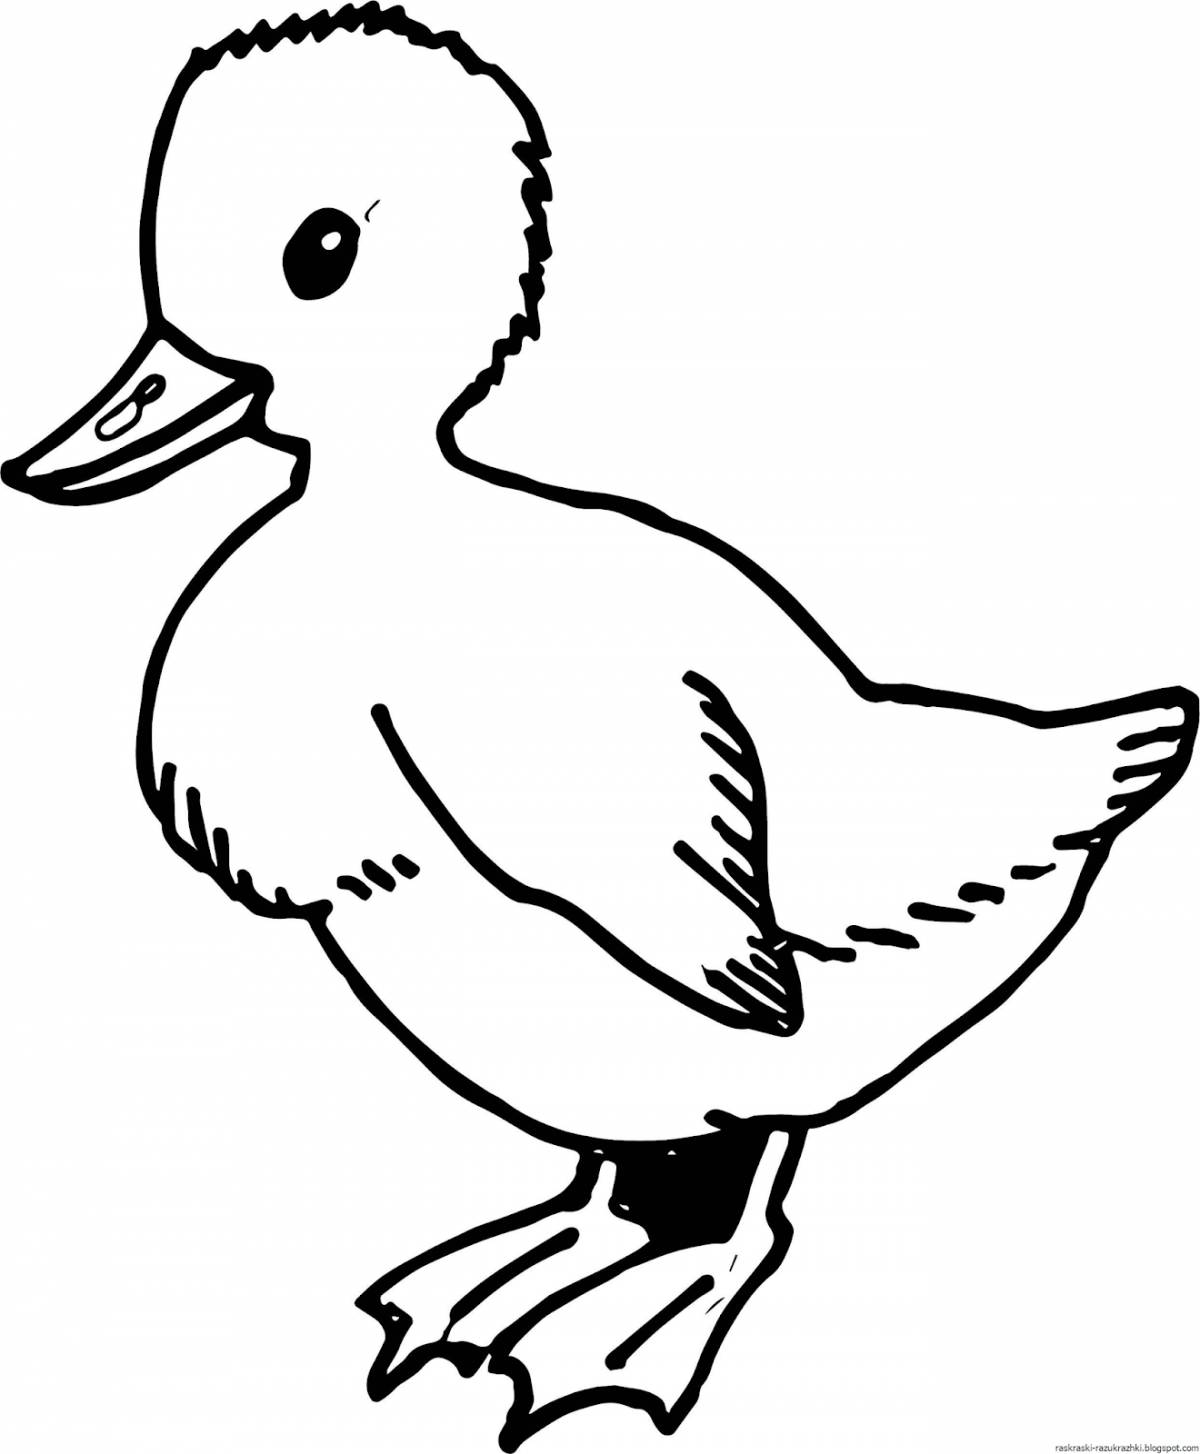 Coloring book happy duck for kids